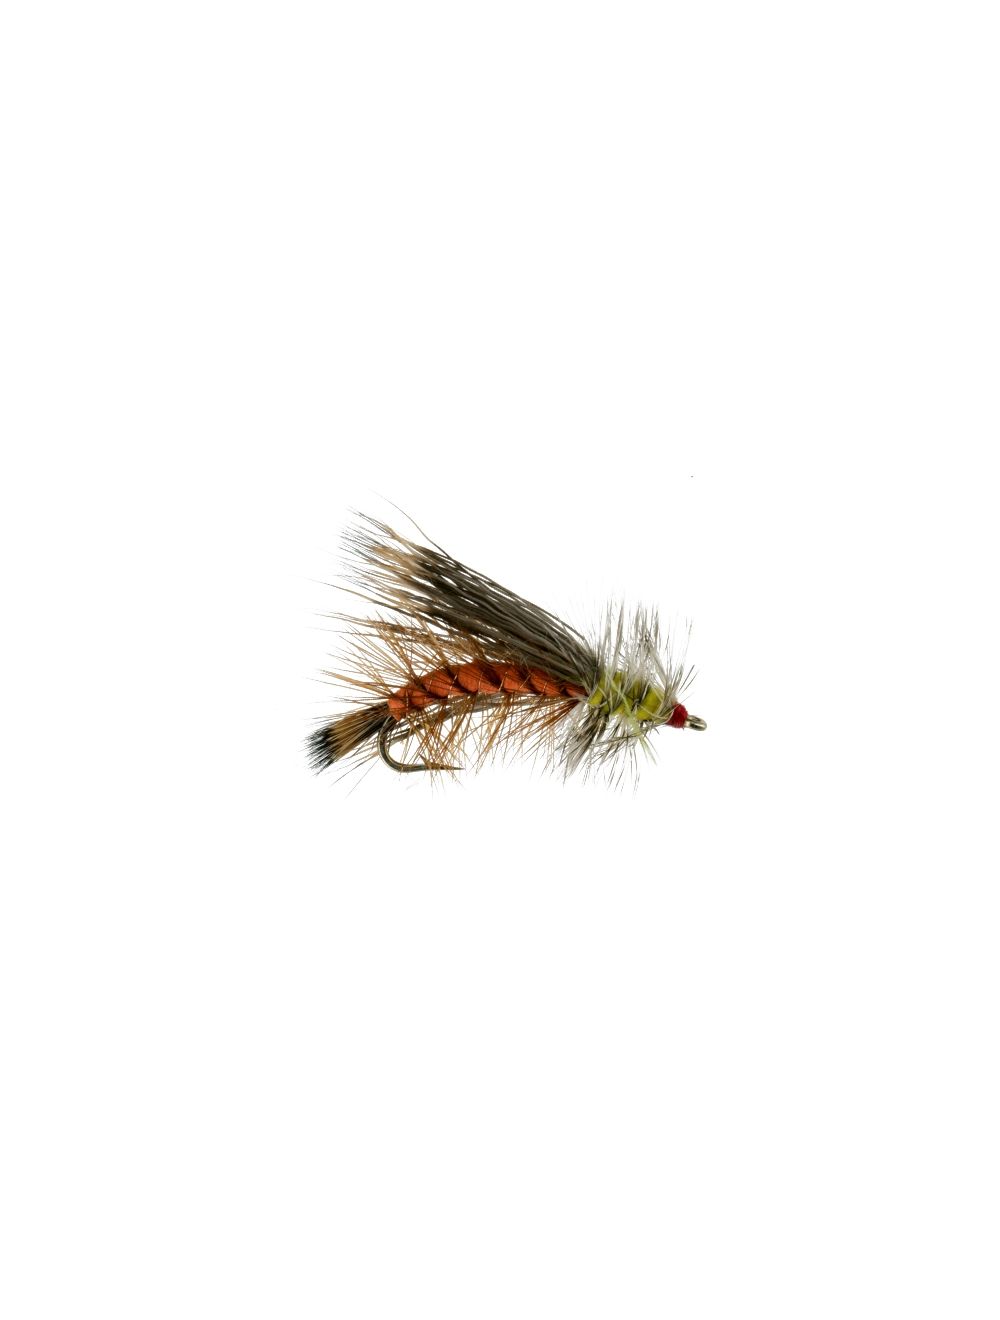 Psycho Stimulator Dry Fly Green/Red Variant - Hand Tied Fly Fishing Flies -  Classic Dry Fly Patterns